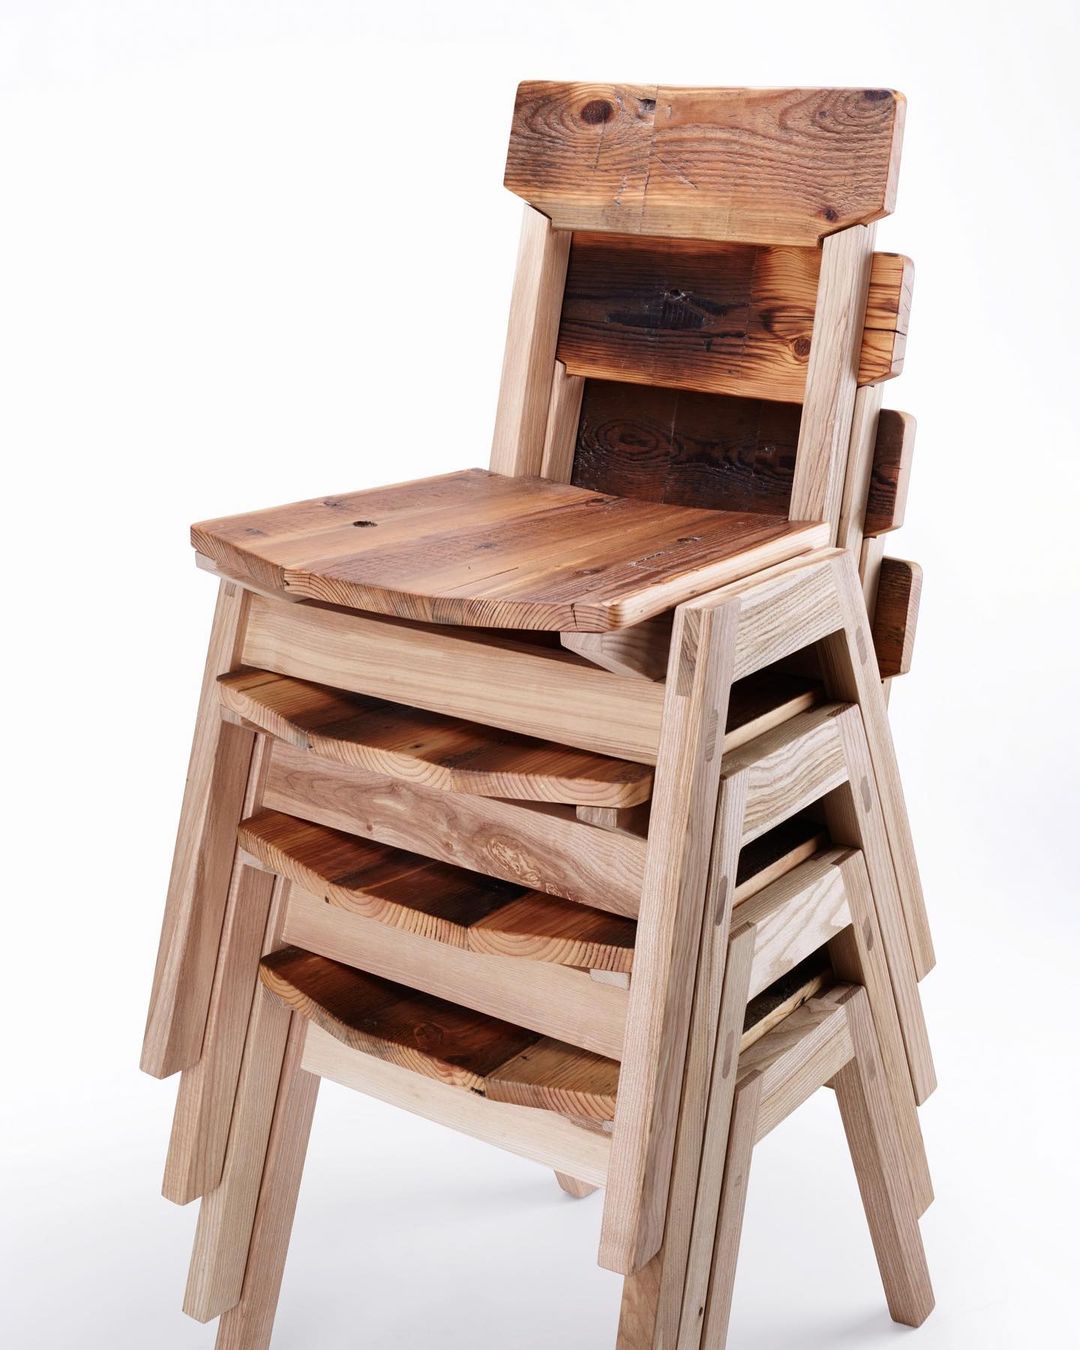 using-reclaimed-timbers-is-a-studio-speciality-of-ours.-the-camberwell-stacking-chair-perfectly-enca-1